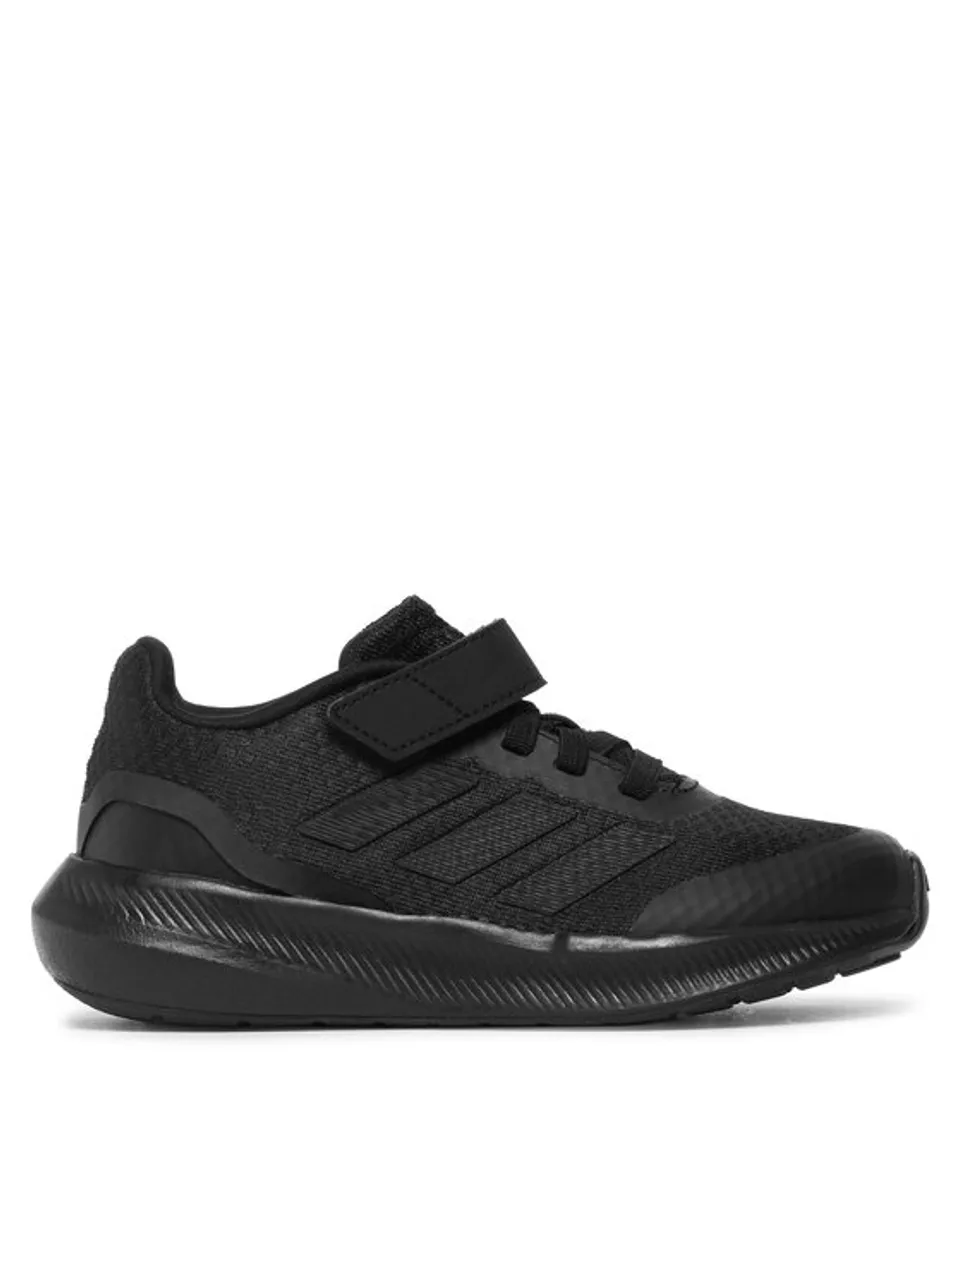 adidas Sneakers Runfalcon 3.0 Sport Running Elastic Lace Top Strap Shoes HP5869 Schwarz